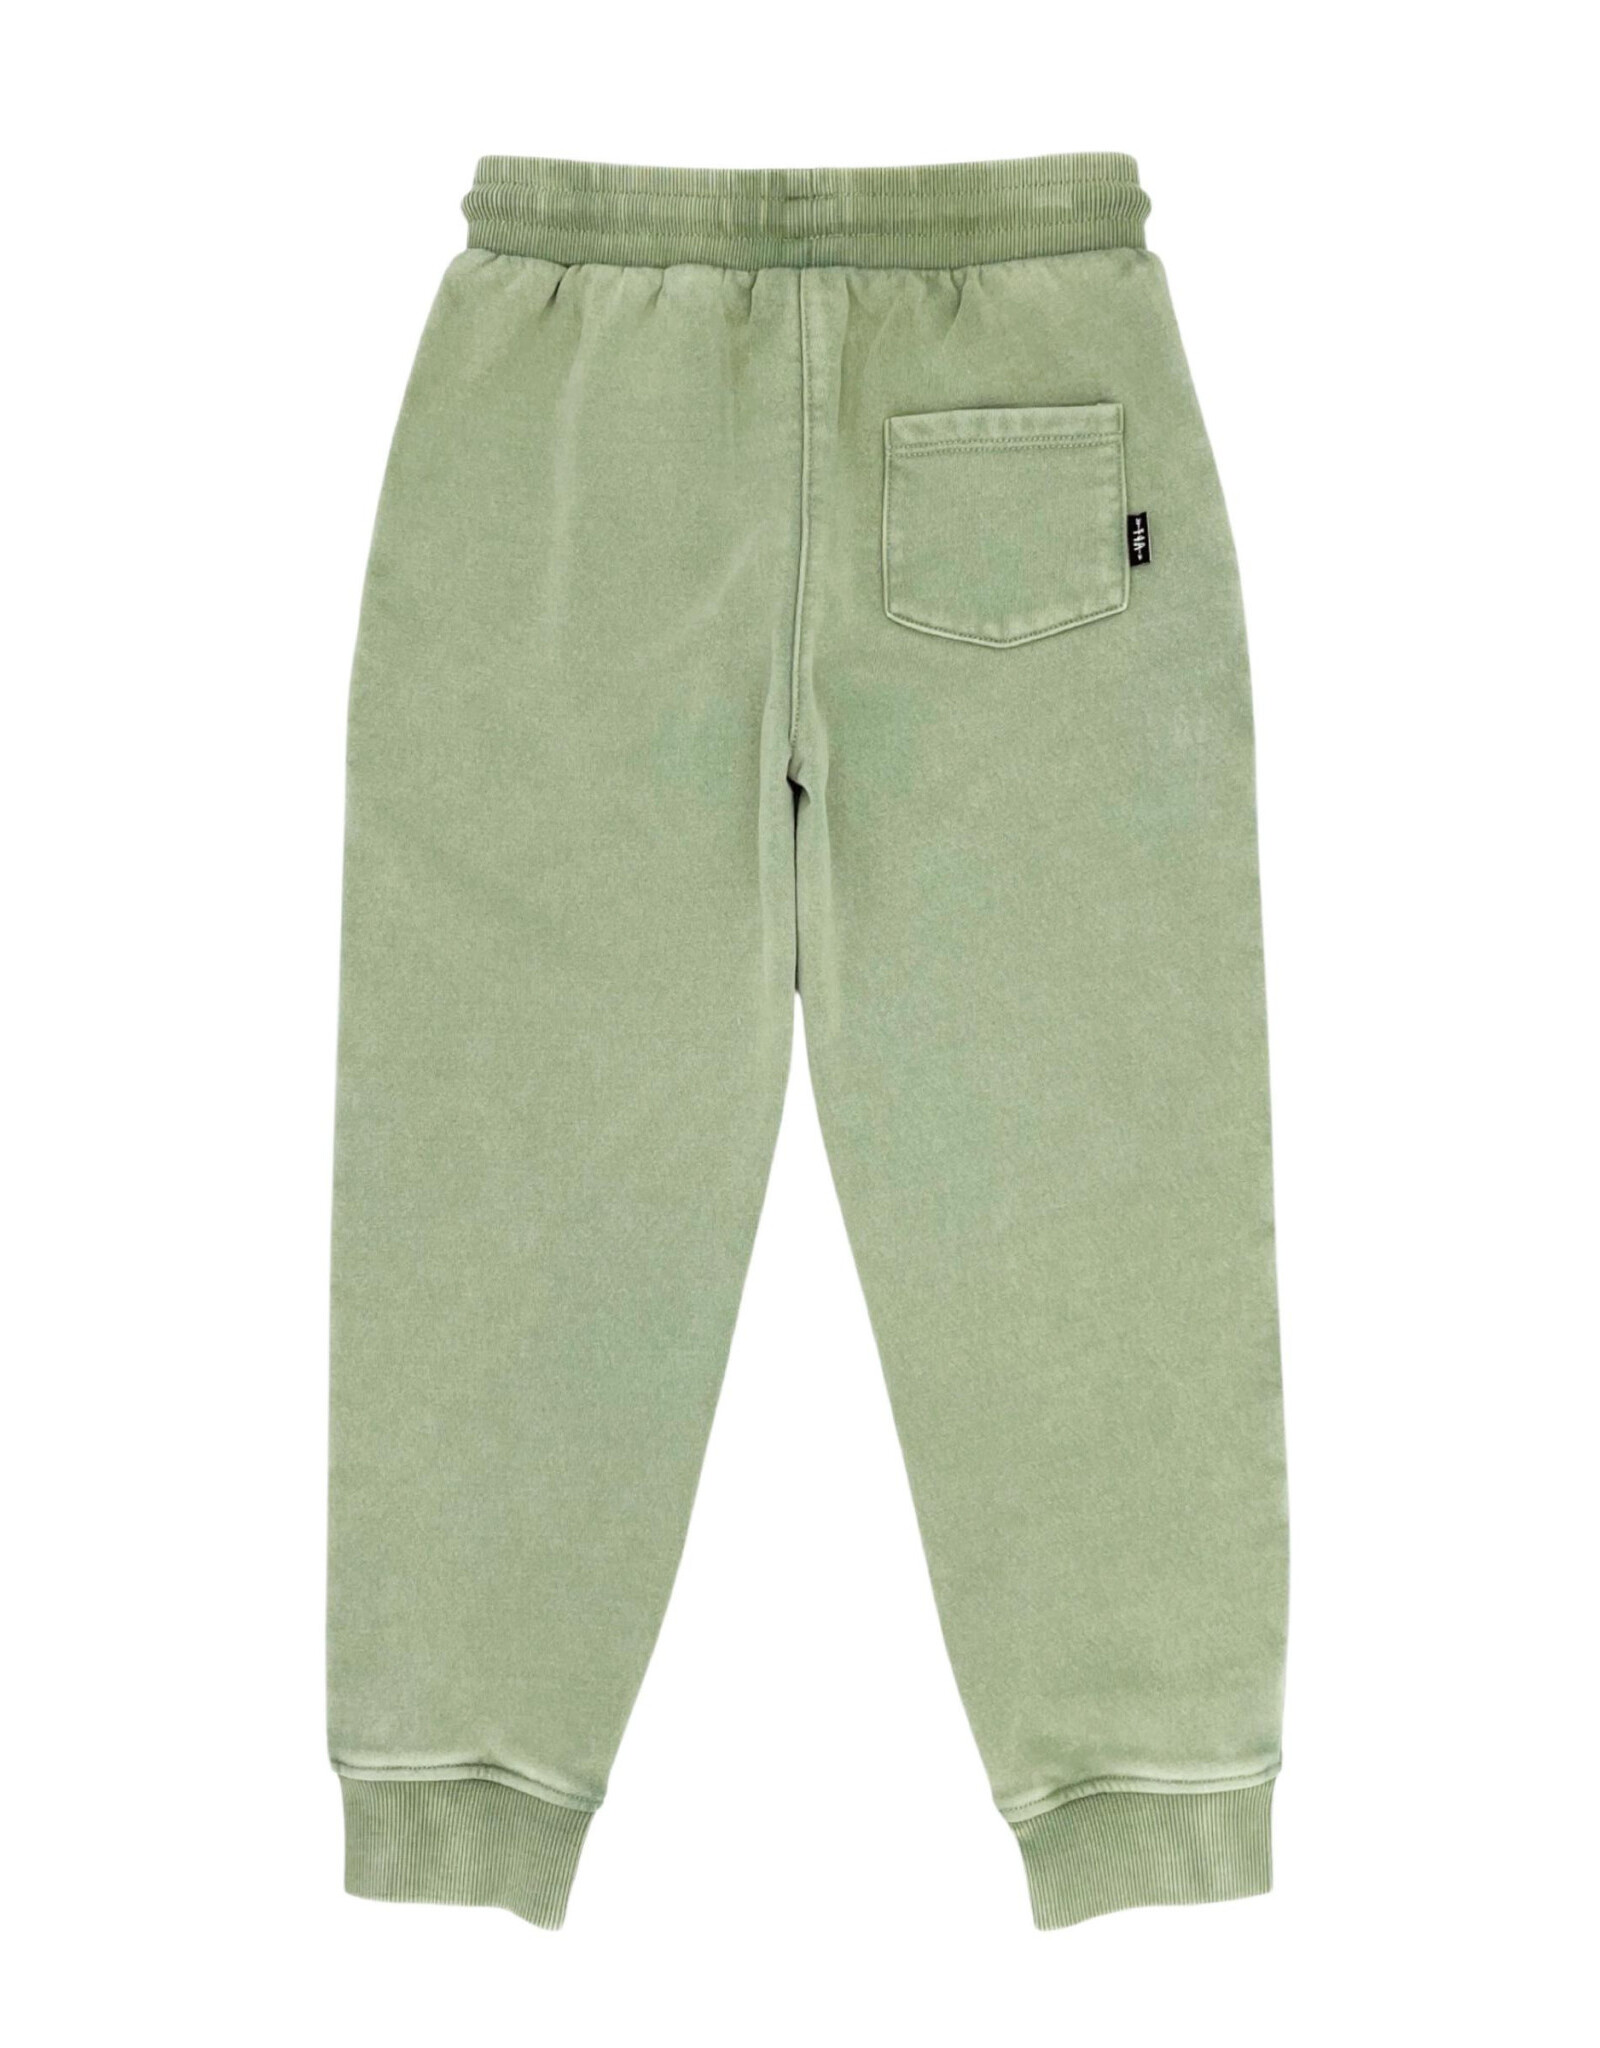 Feather 4 Arrow outsiders jogger- sage